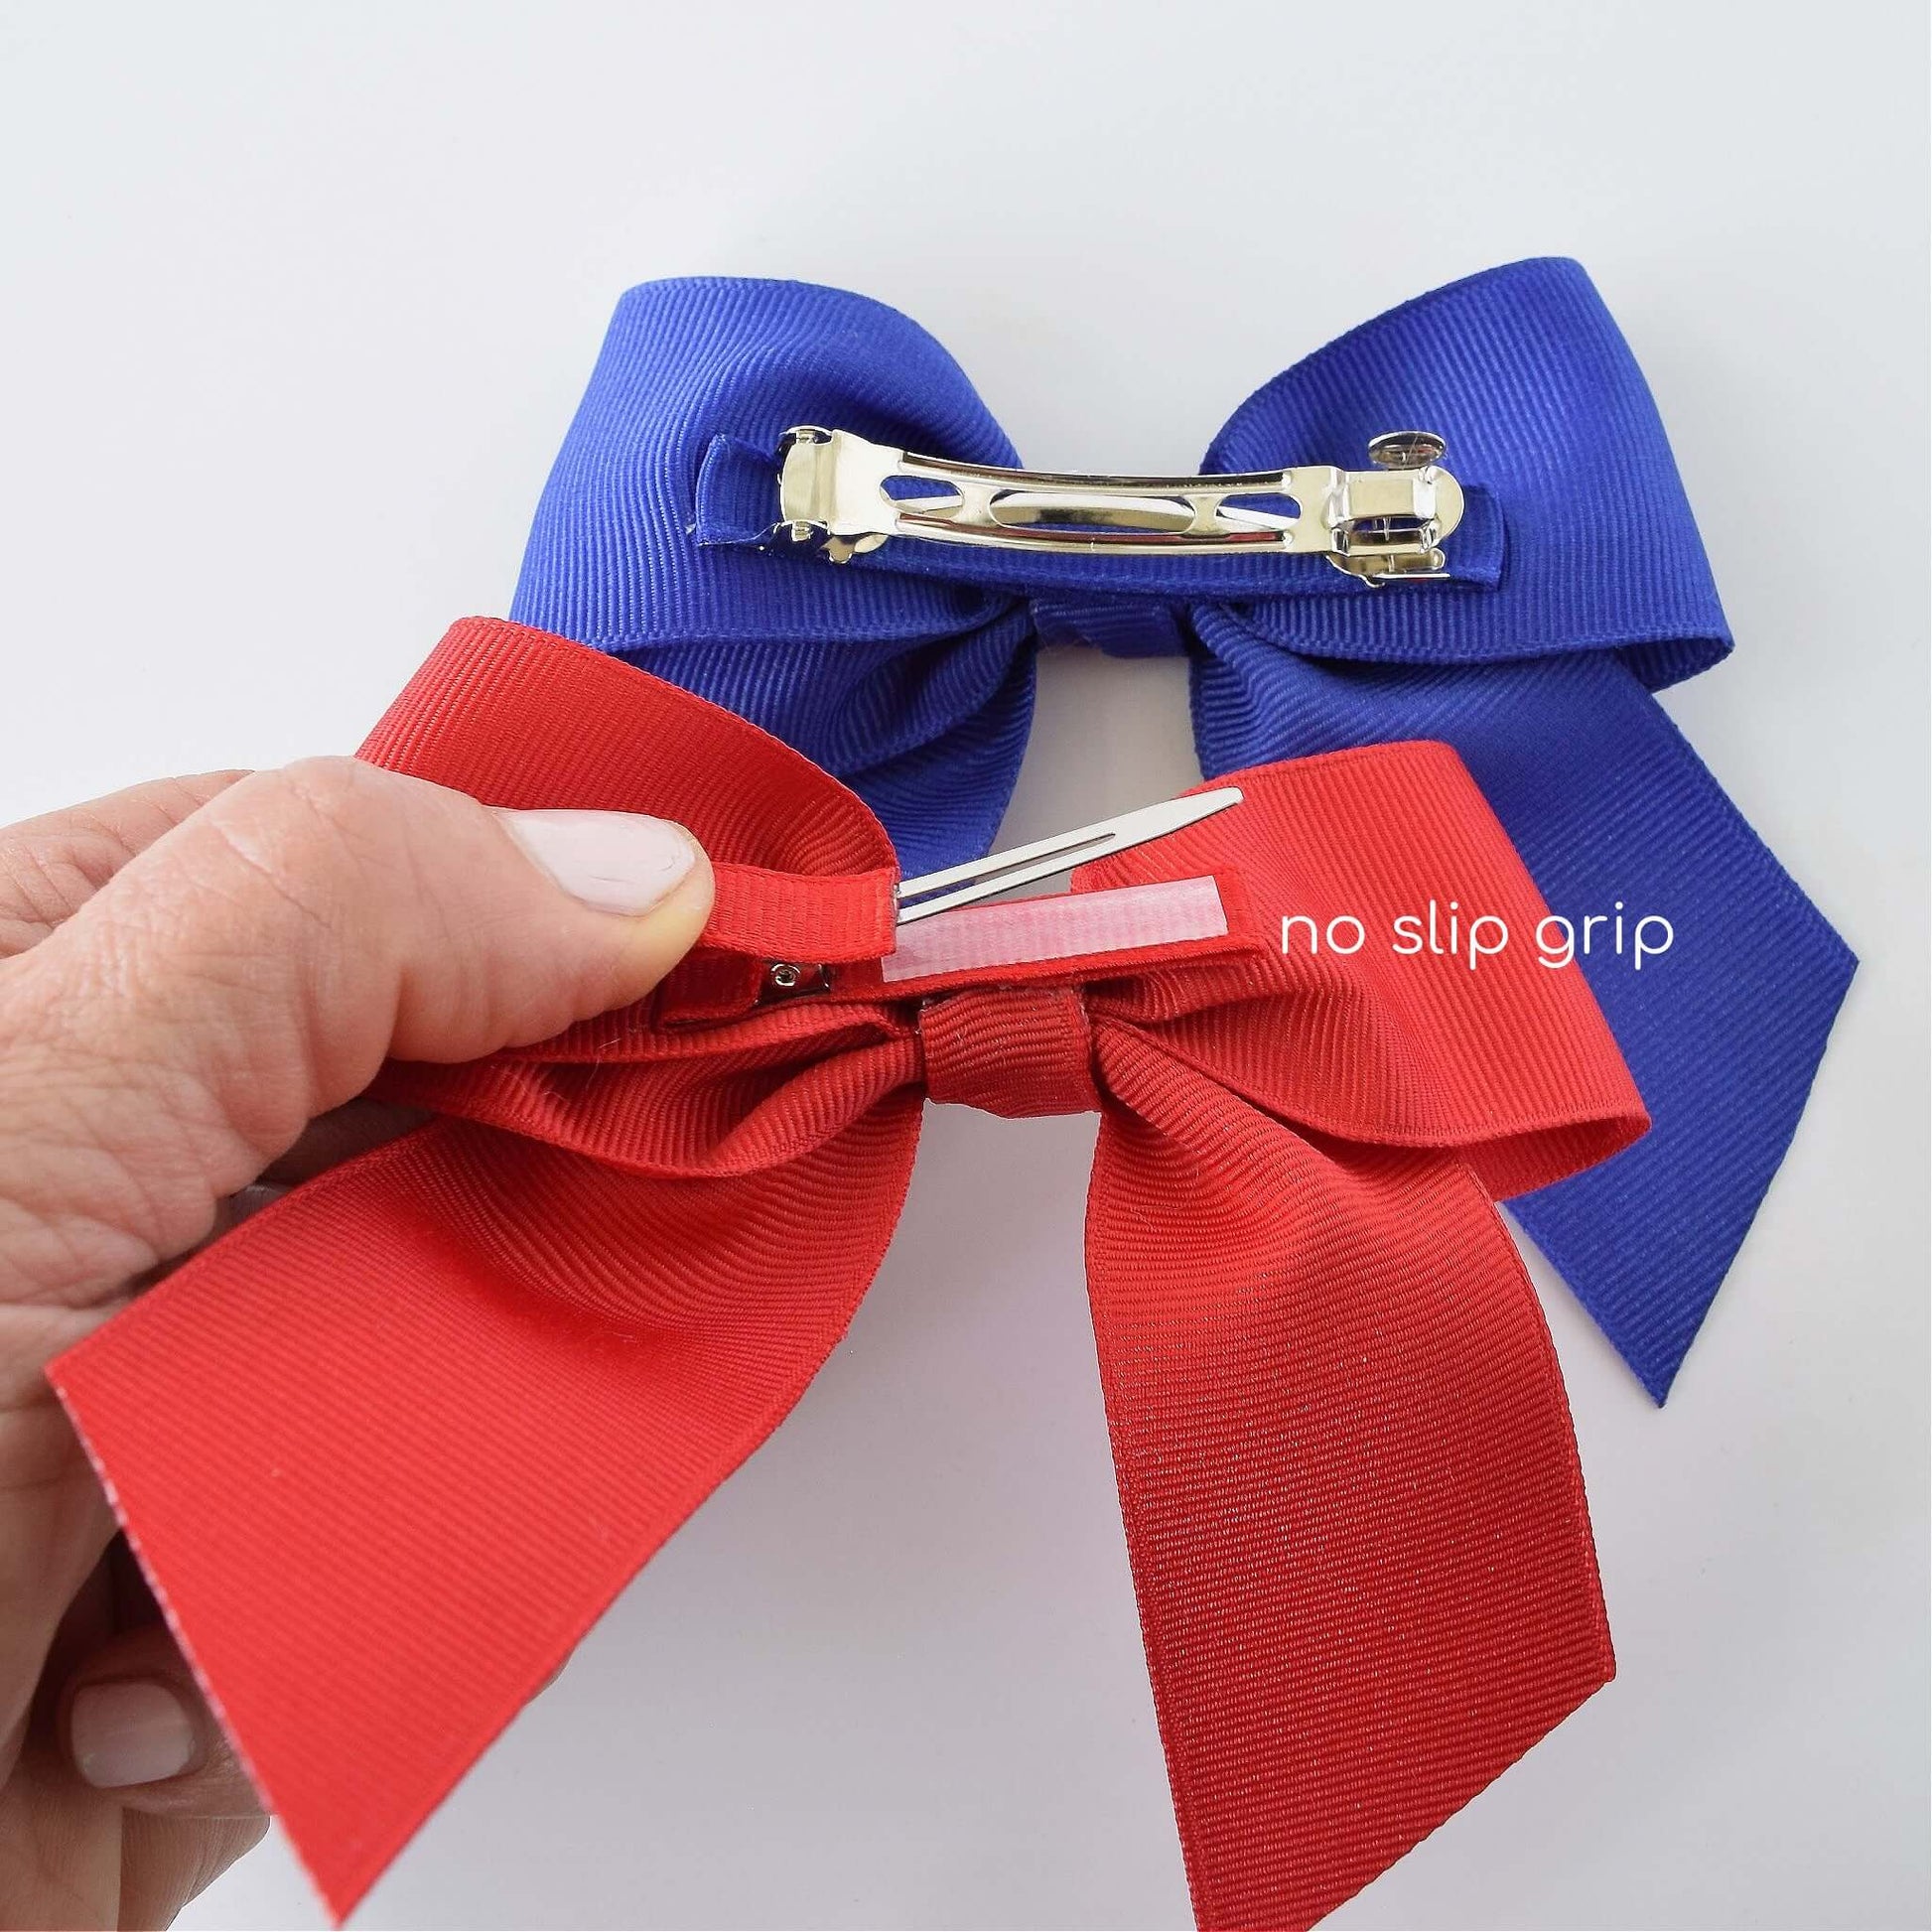 Close-up of handmade grosgrain Sailor hair bows in red and blue, showcasing no-slip grip alligator clips and French barrette.